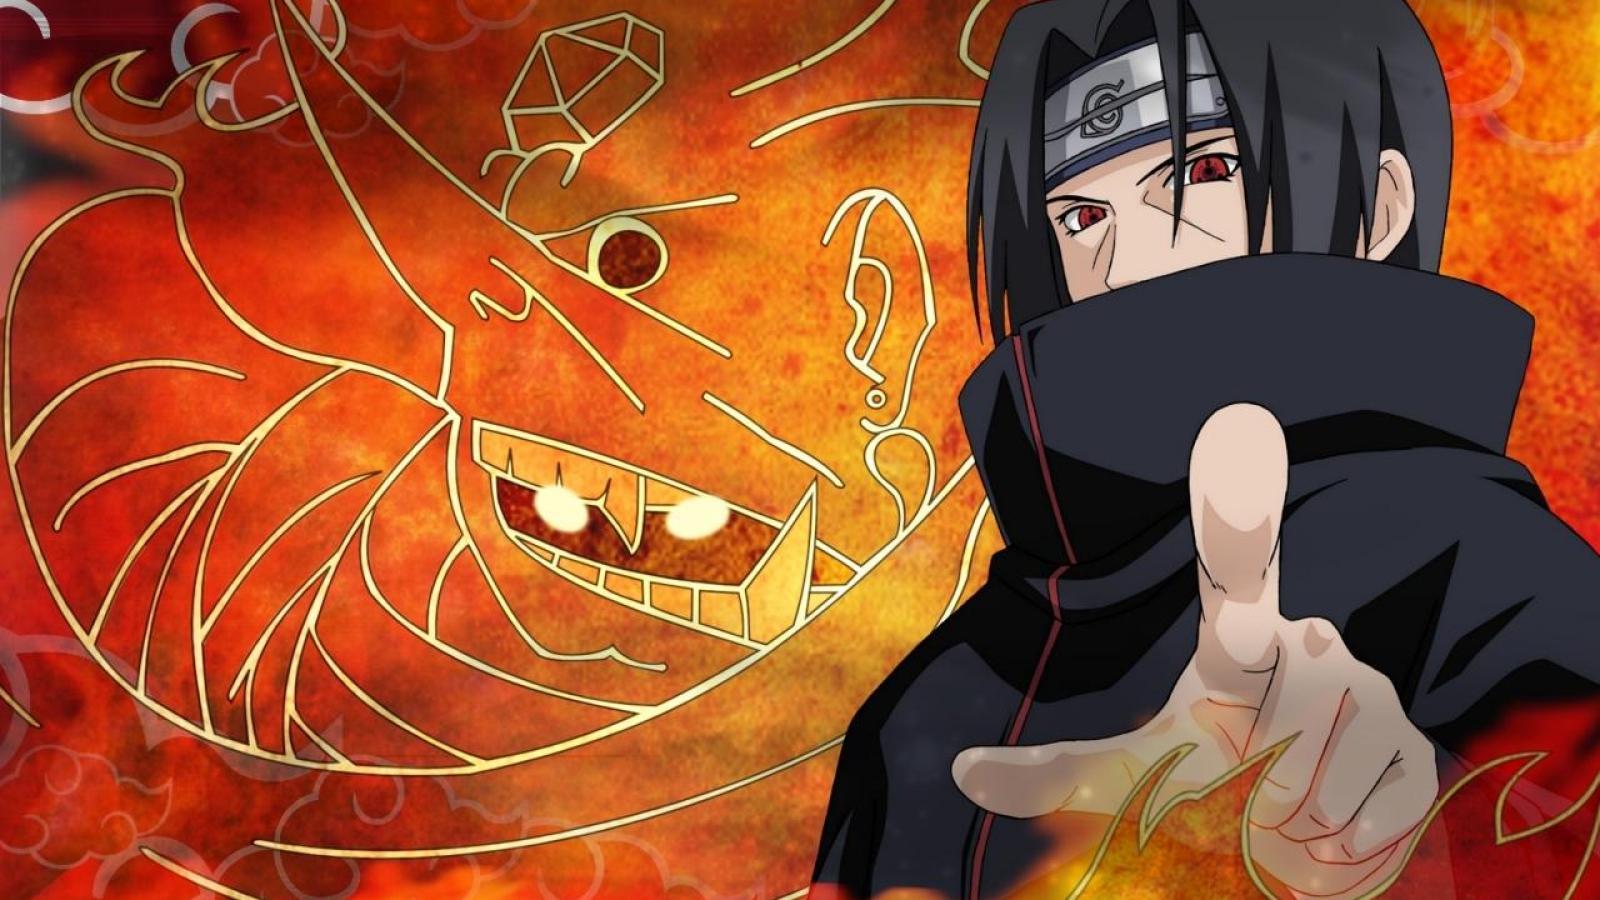 Itachi Susanoo wallpaper by ManeyHB  Download on ZEDGE  2e6a